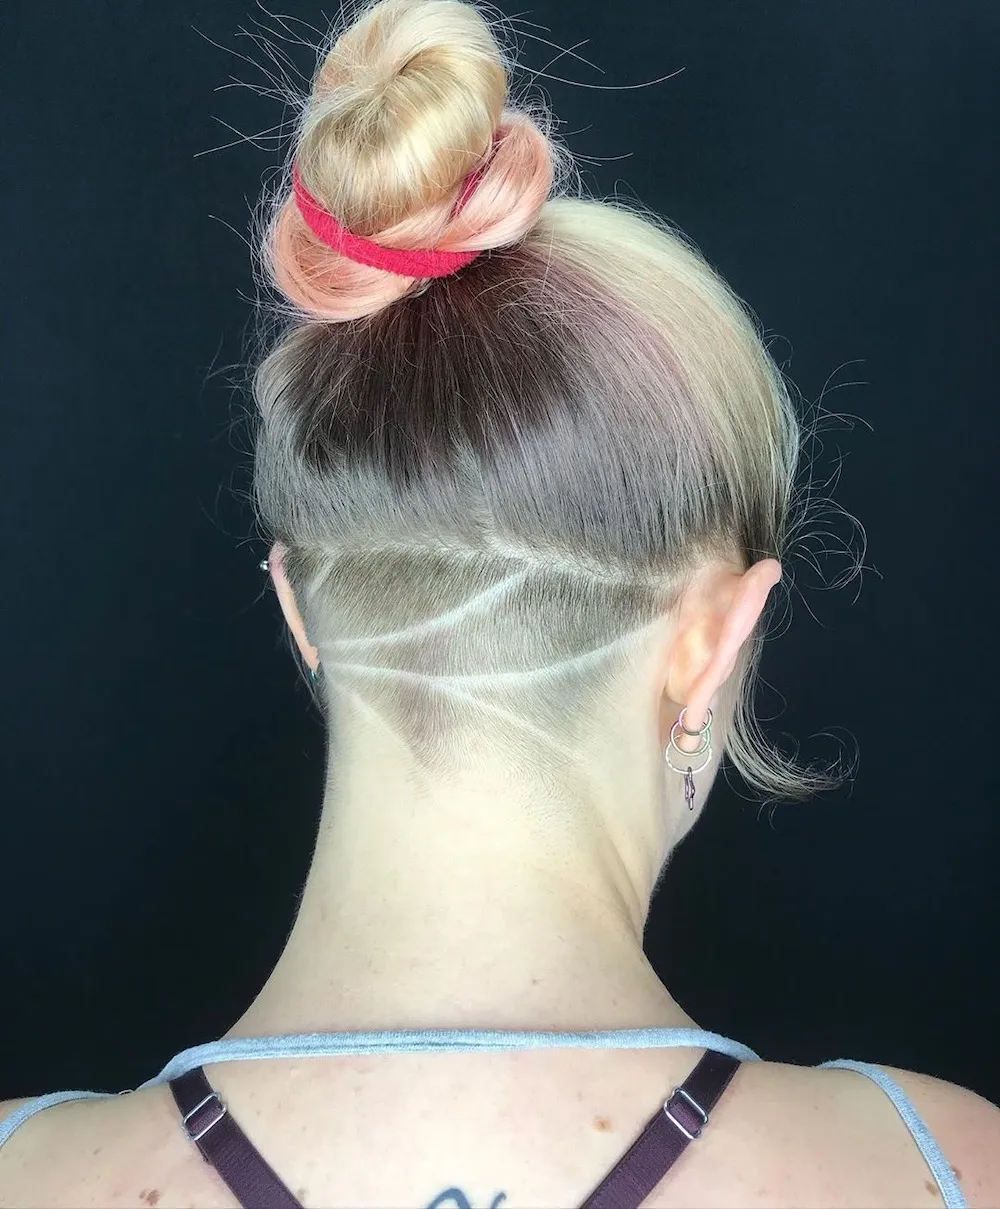 Undercut Women's Hairstyles; Are They for Me?